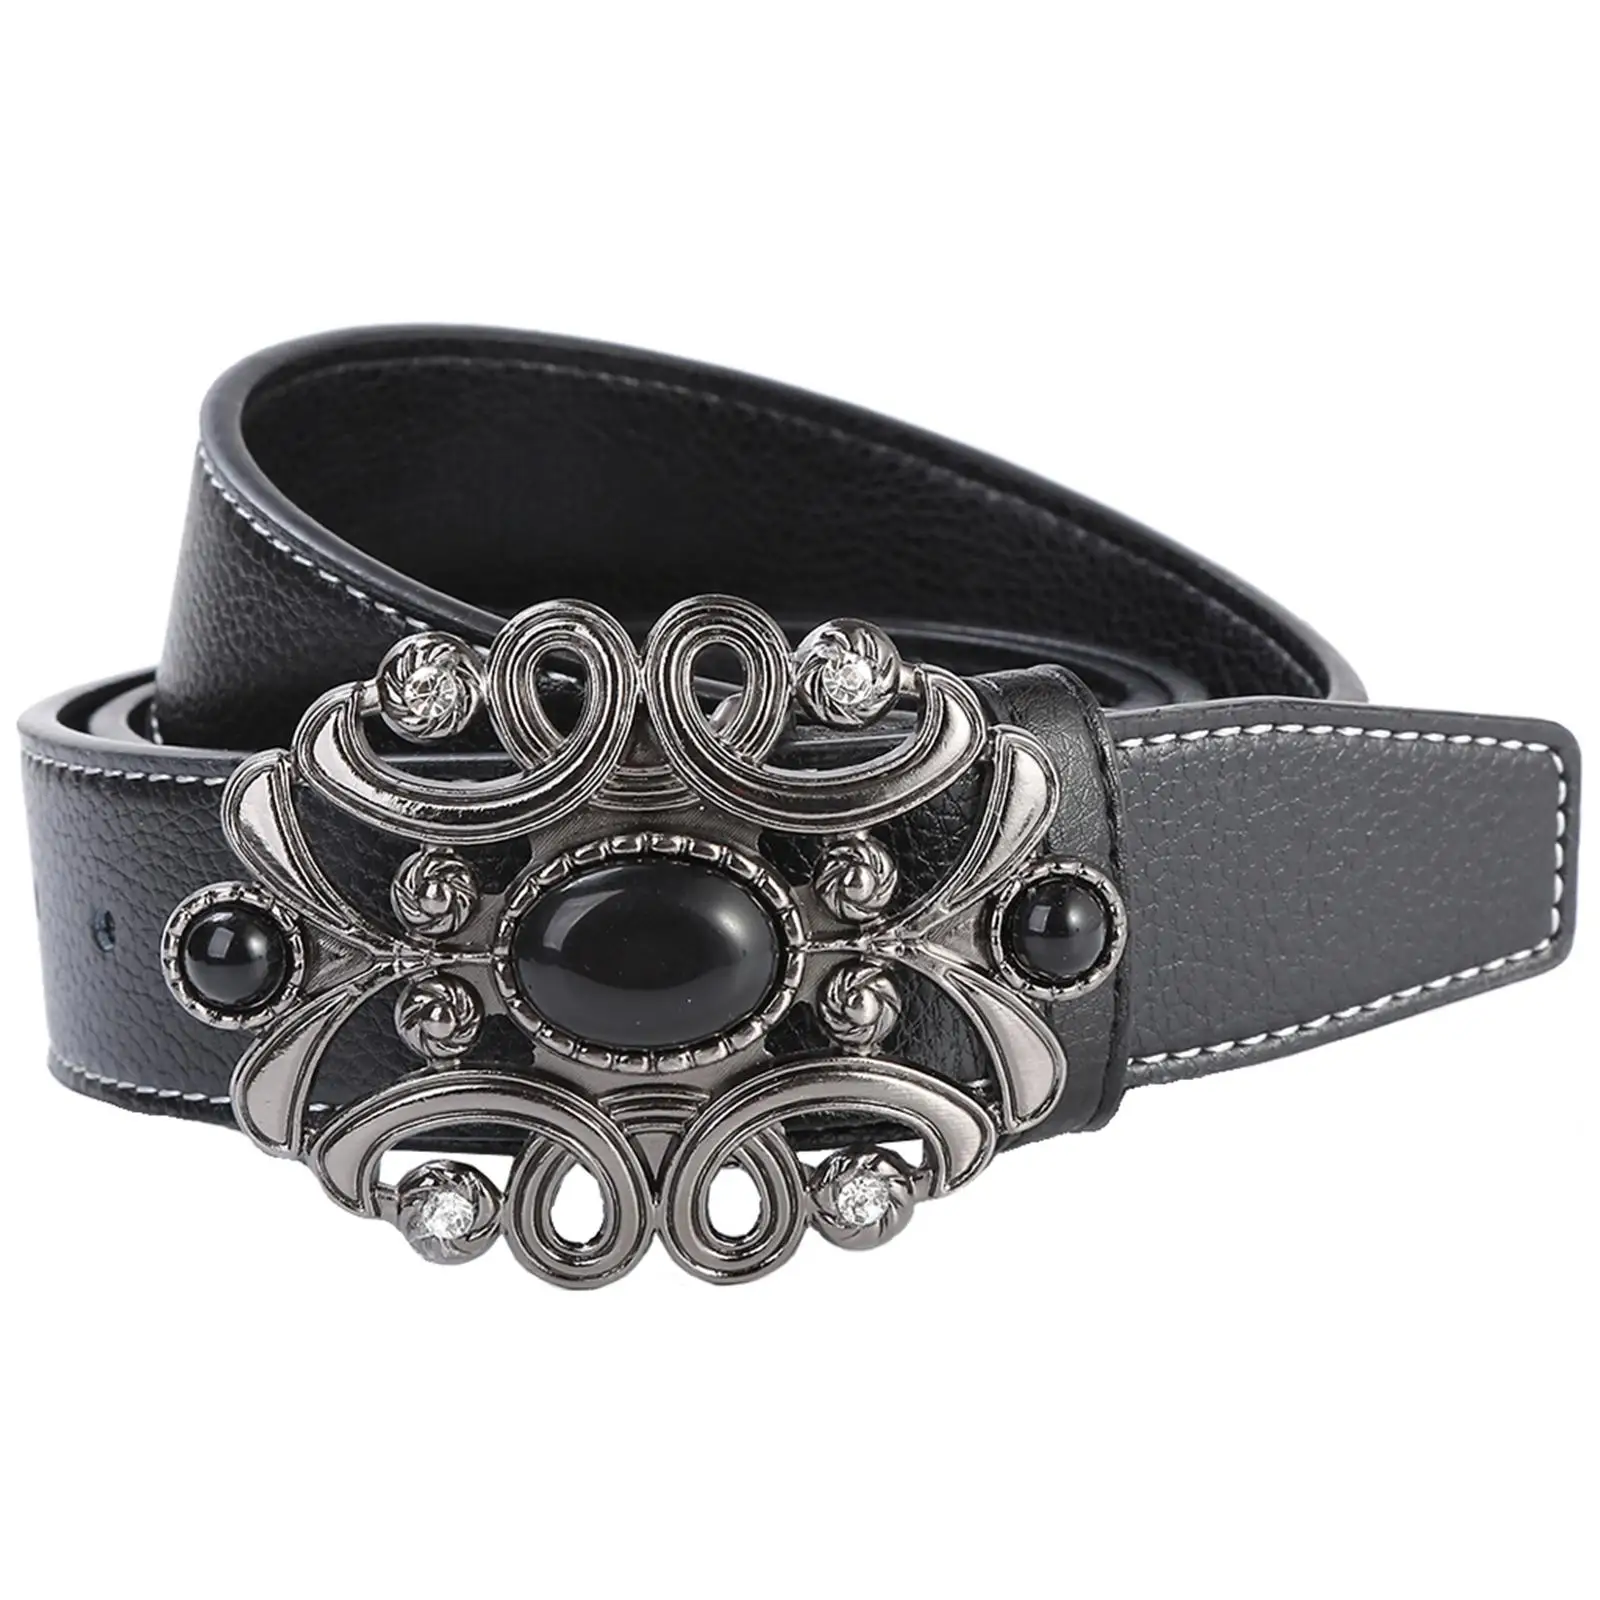 Fashion Western Belt with Buckle Mens Belt Waistband for Husband Birthday Gifts Gift